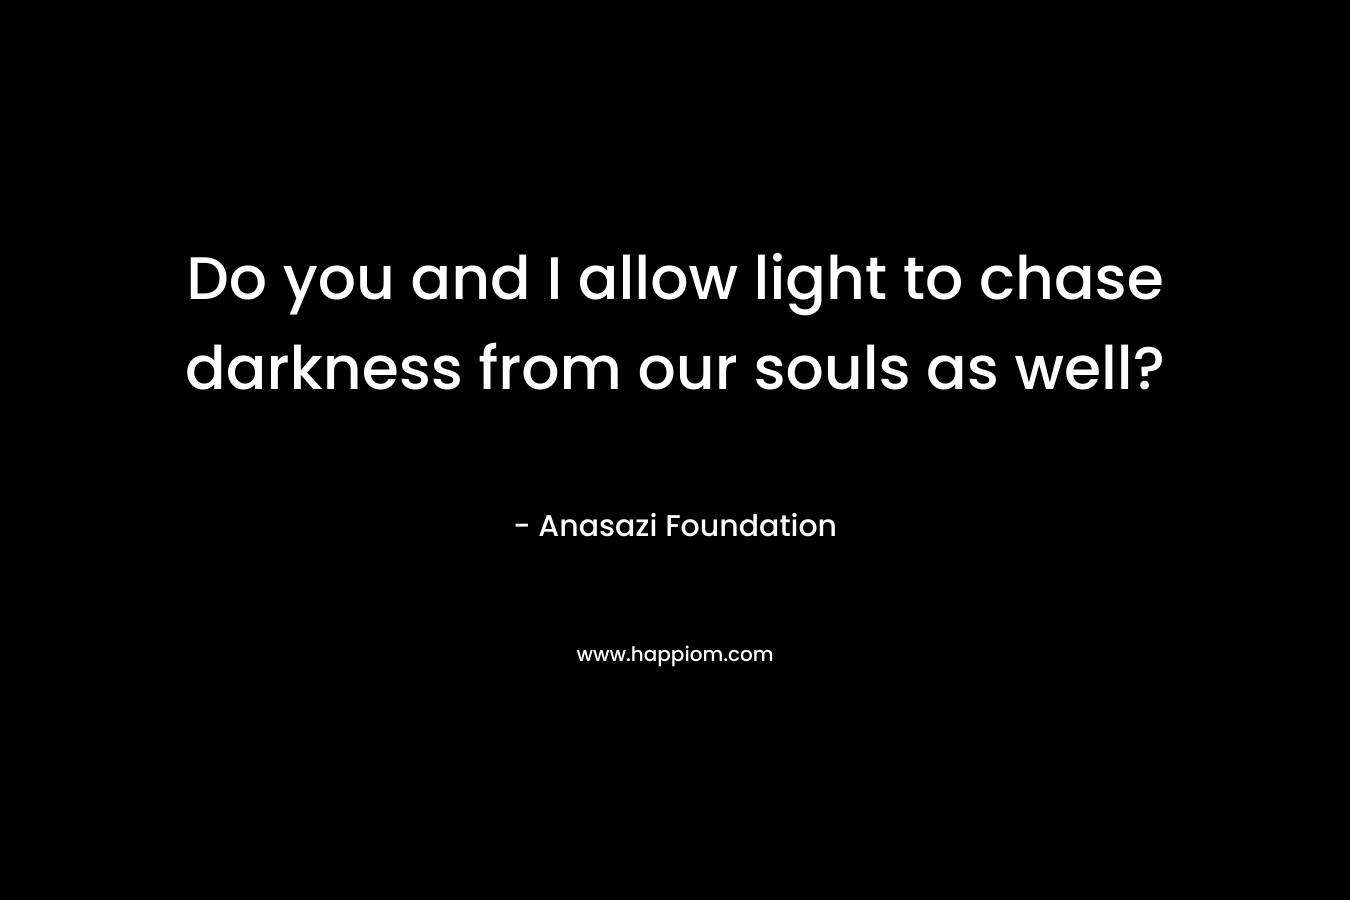 Do you and I allow light to chase darkness from our souls as well?